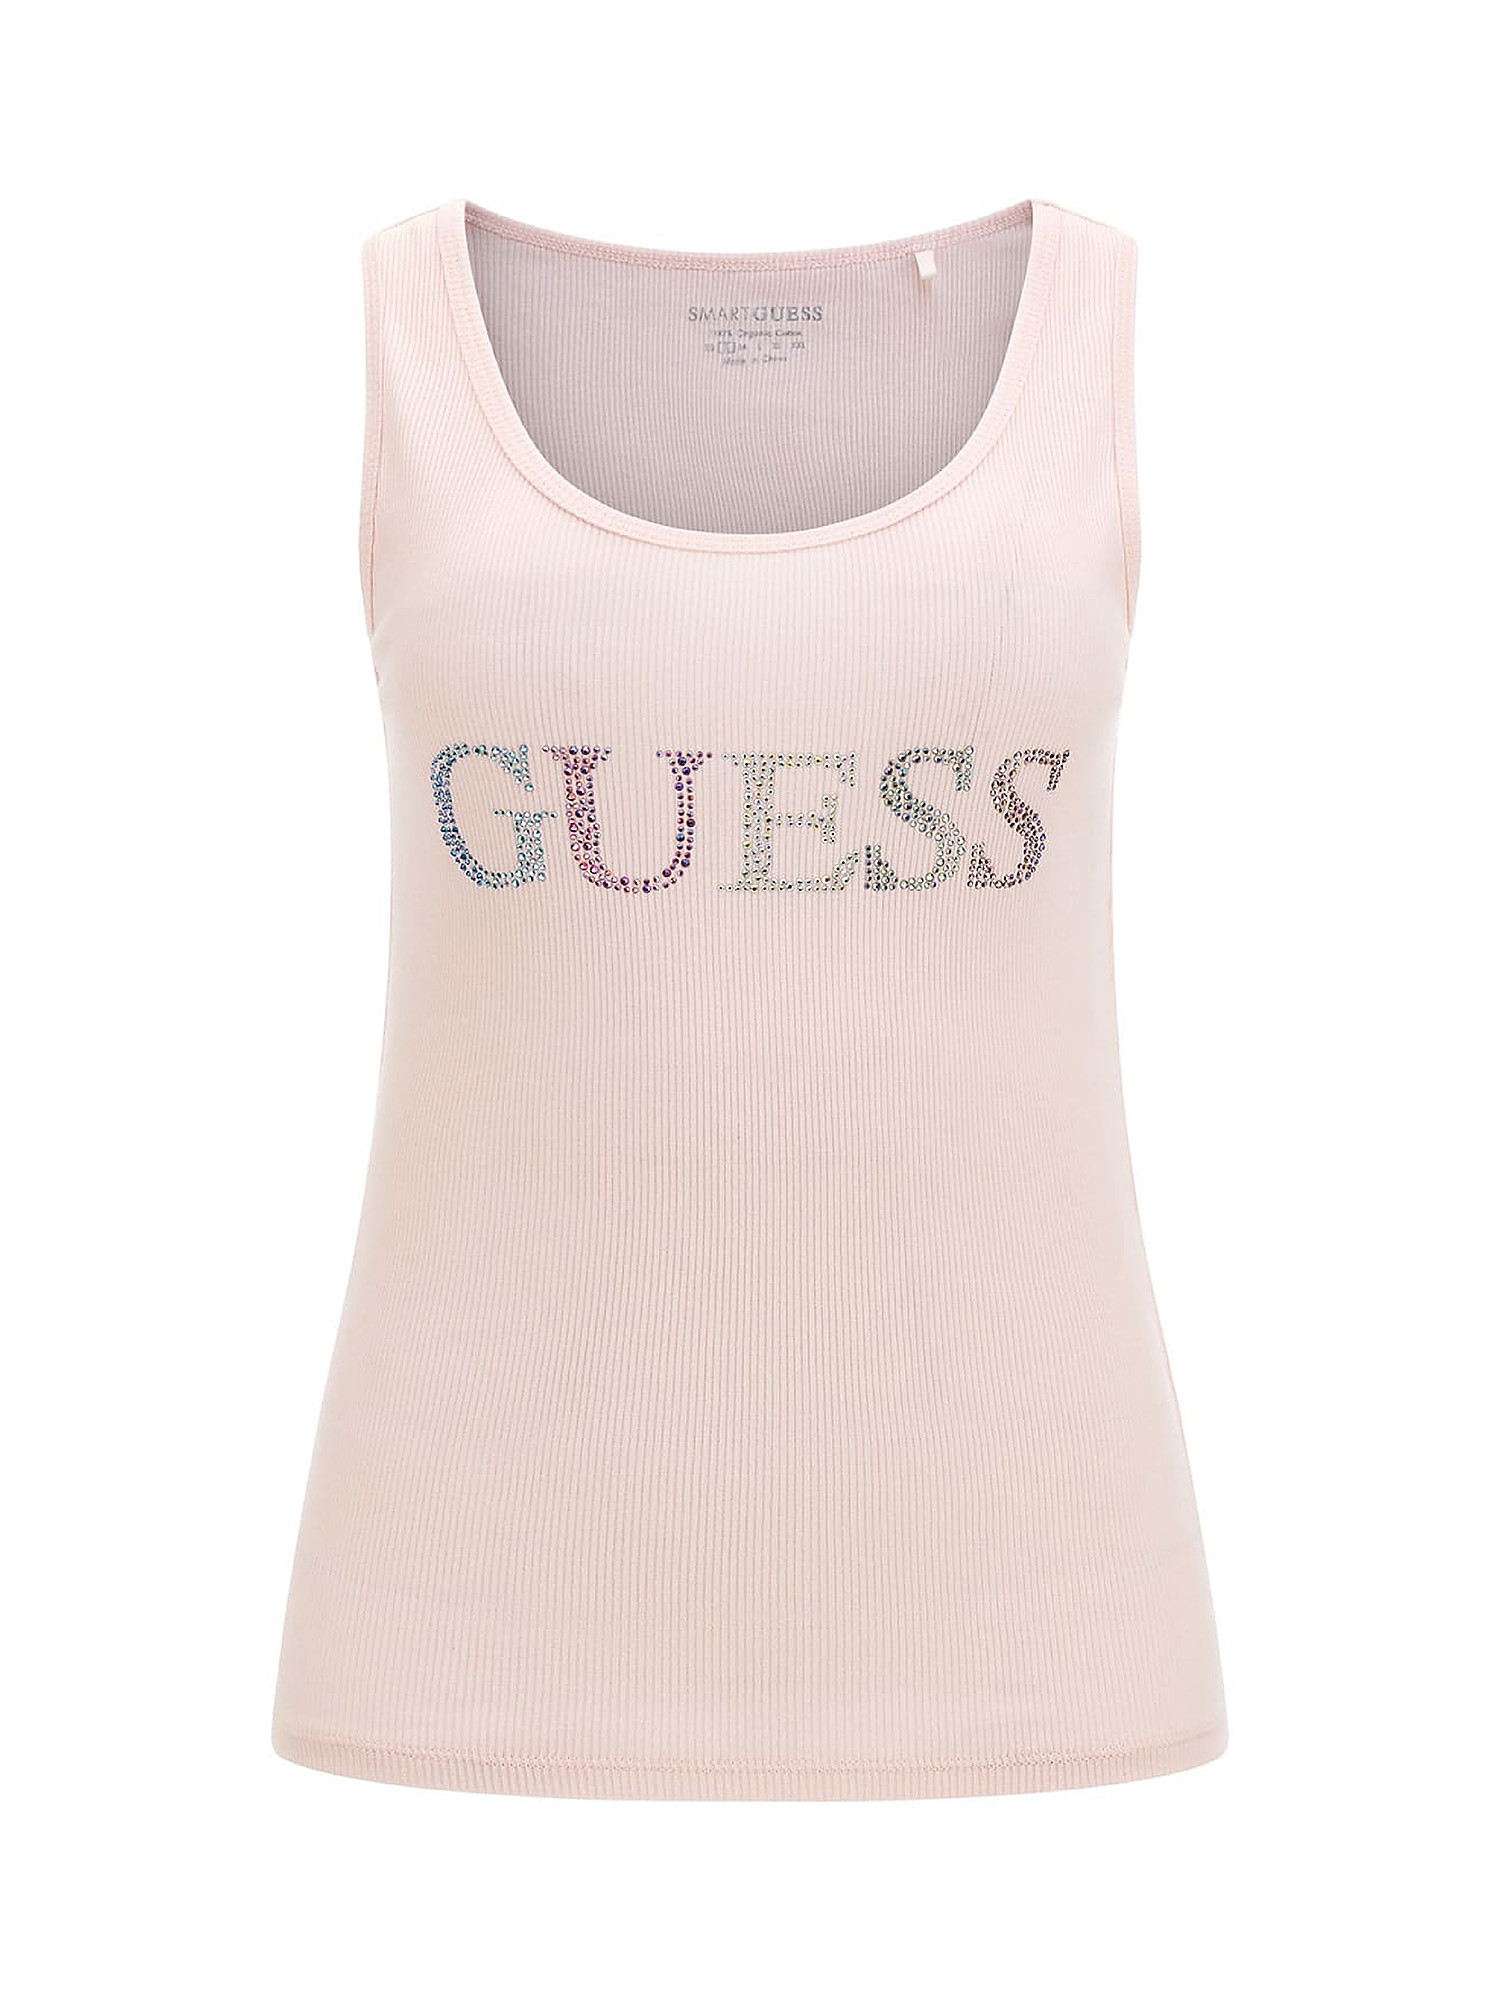 GUESS - Canotta in cotone con logo, Rosa, large image number 0